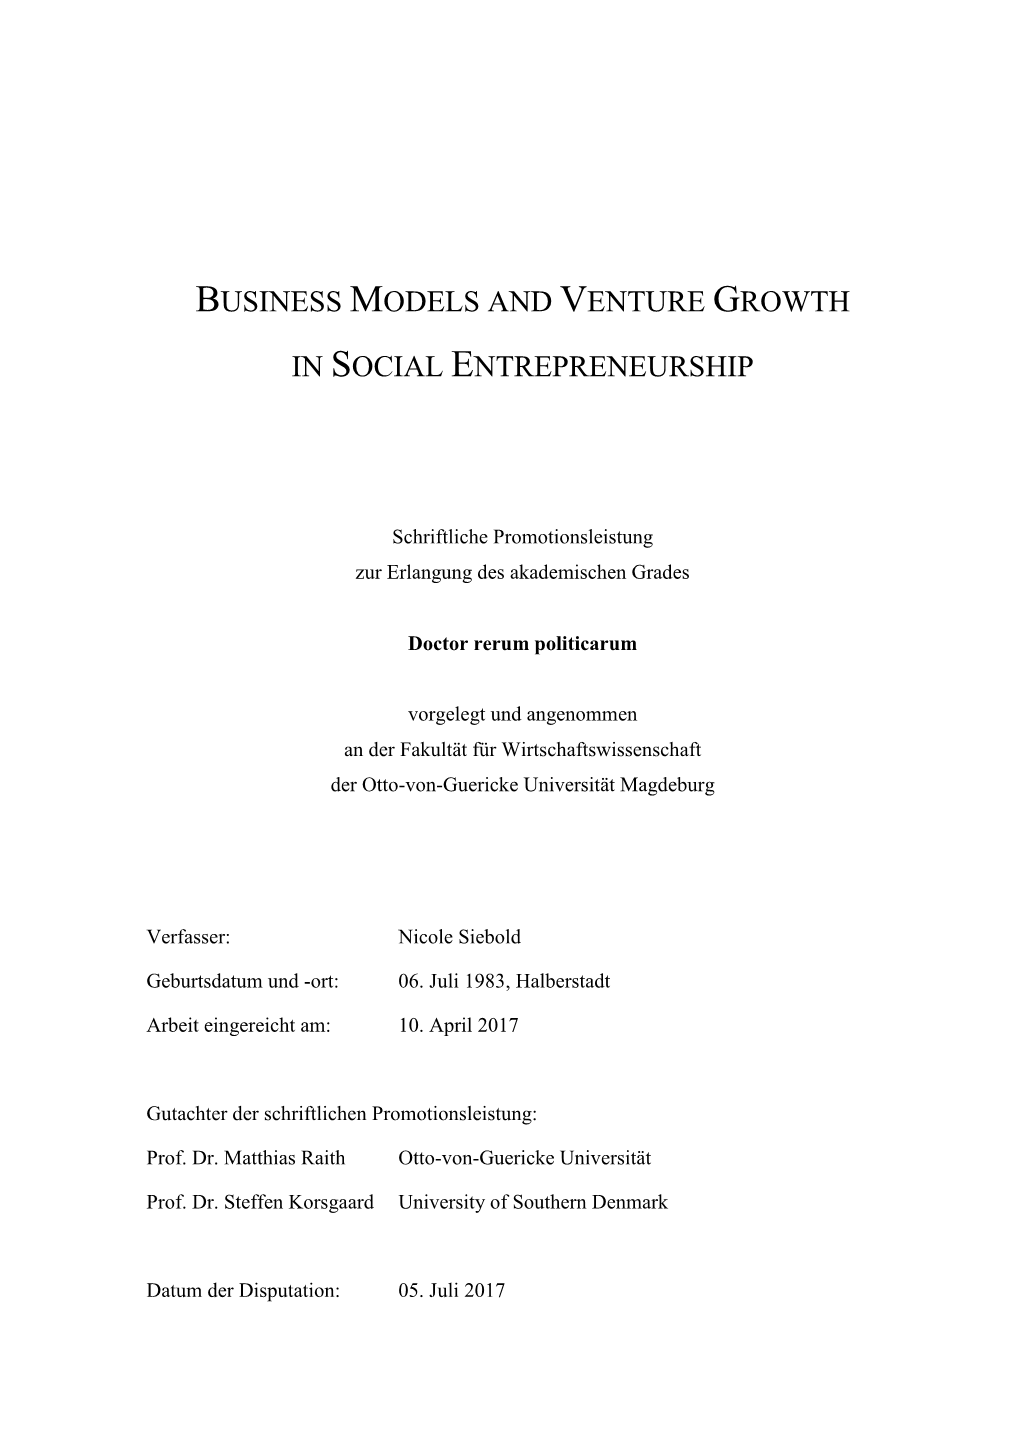 Business Models and Venture Growth in Social